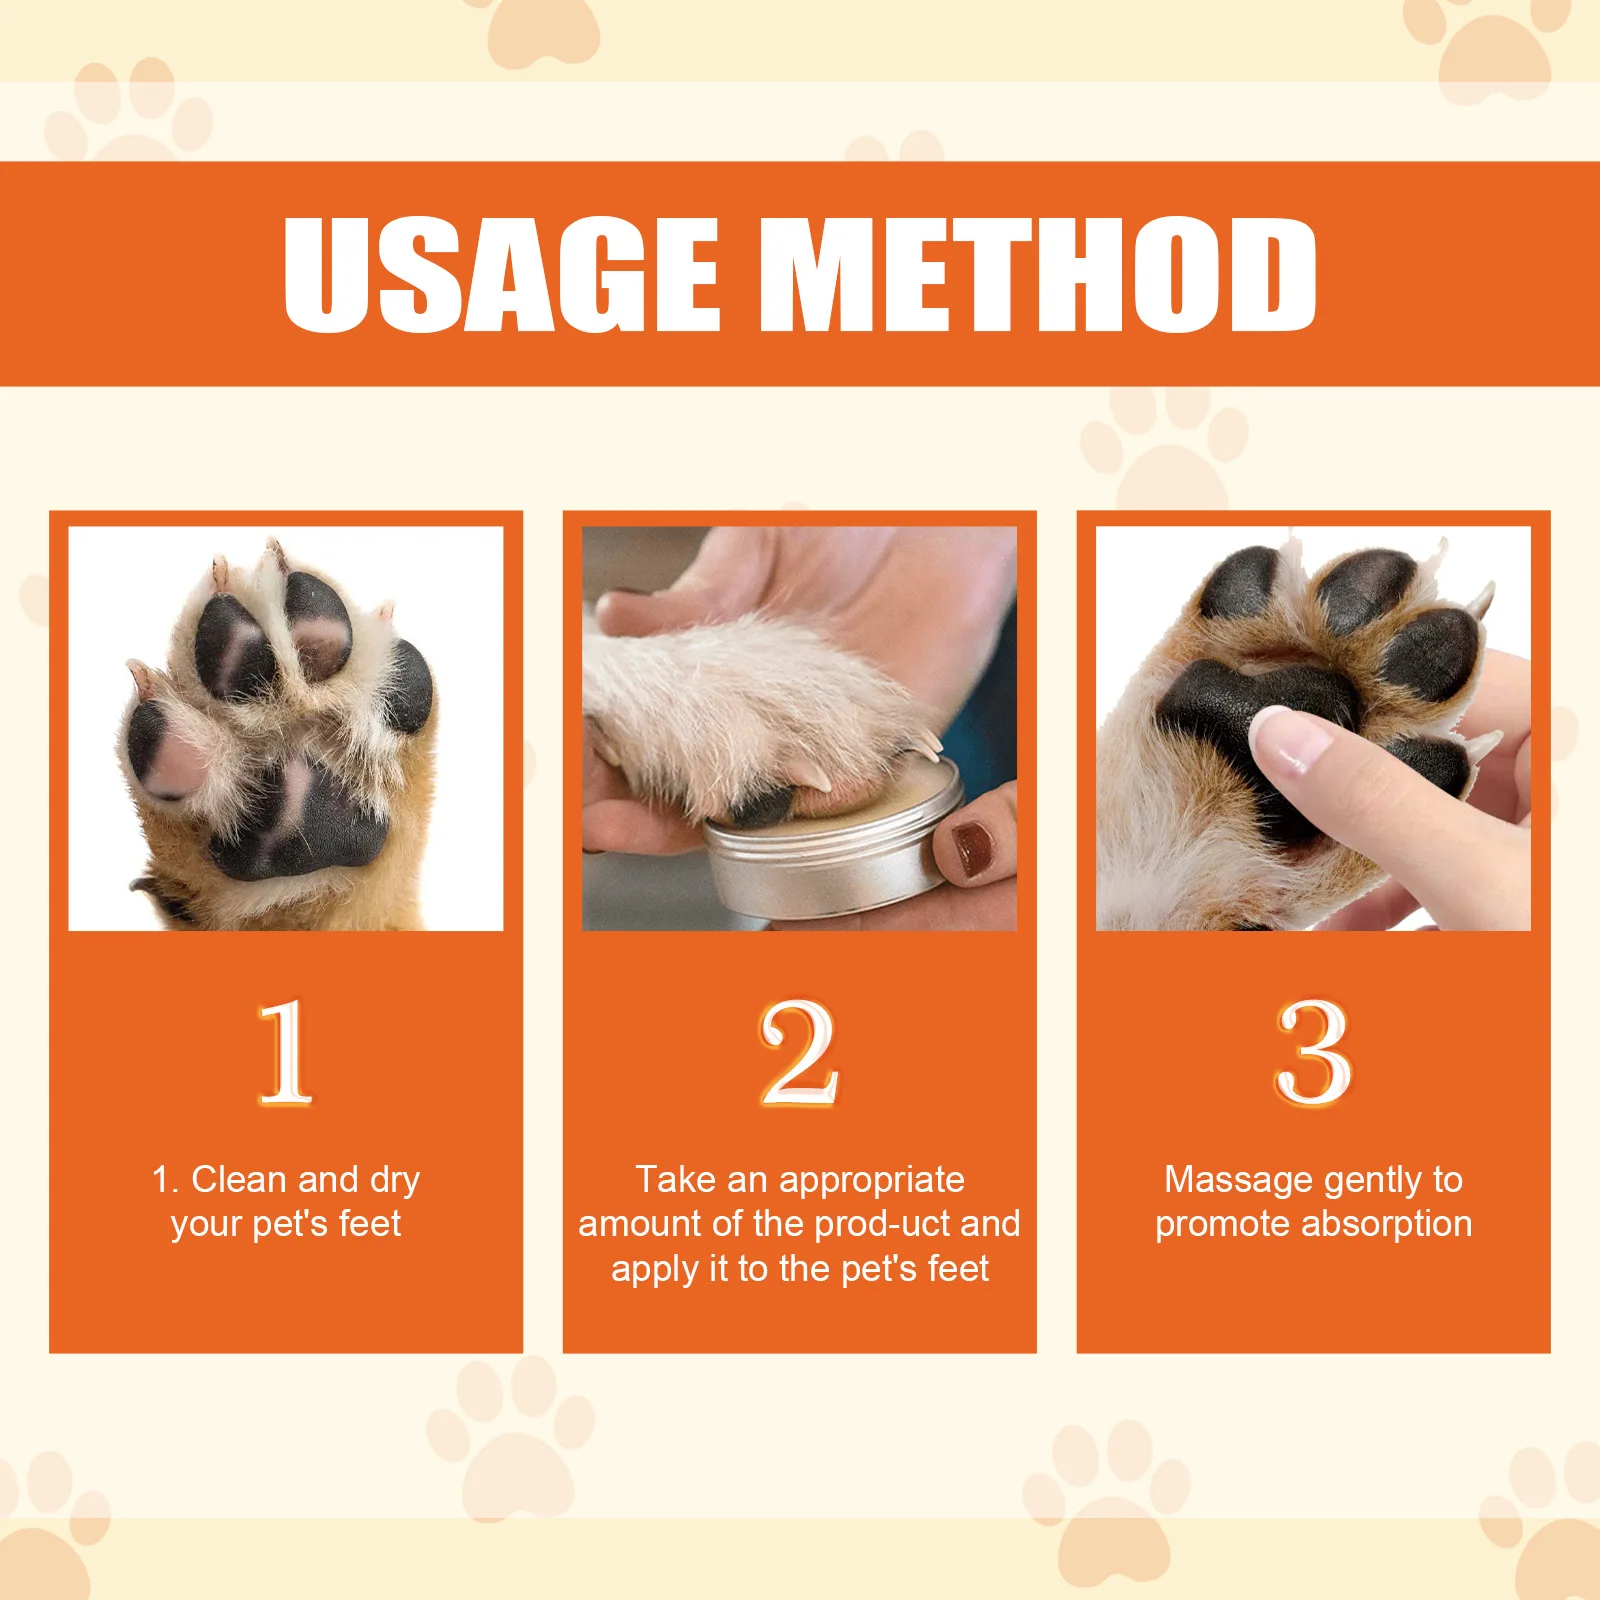 Paw Balm For Dogs  Noses Paws Moisturizer Cream Cats Dogs Paw Protector Lick Safe Pet Supplies For Extreme Weather Conditions images - 6